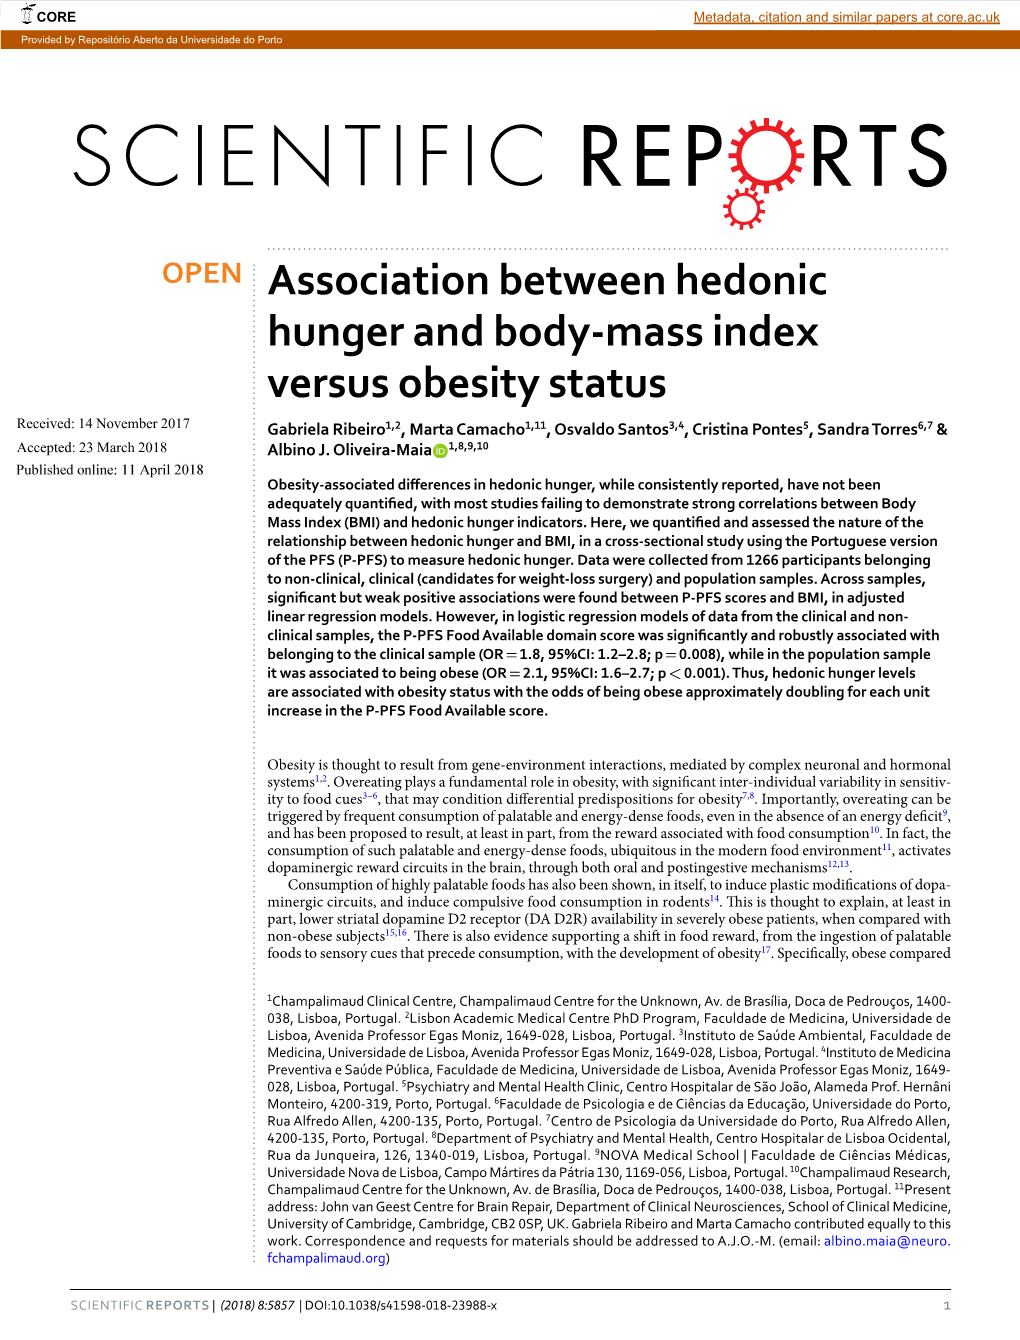 Association Between Hedonic Hunger and Body-Mass Index